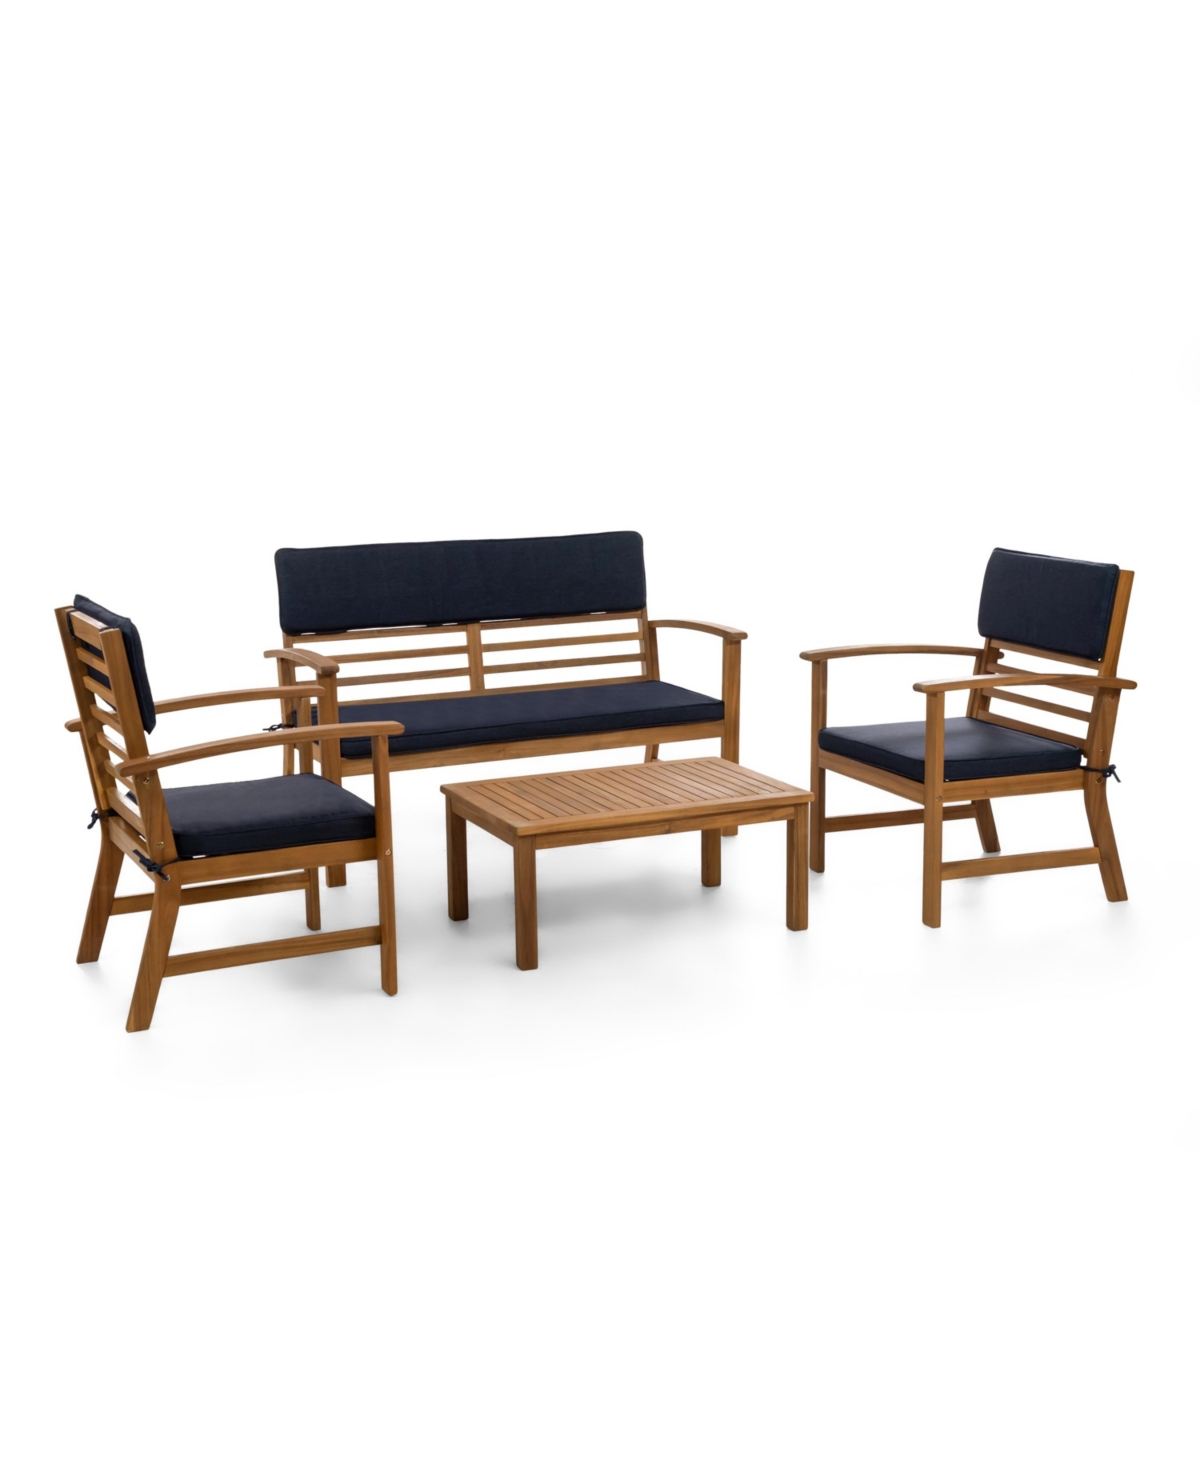 Furniture Of America 4 Piece Acacia Patio Bench Table Set With Cushions In Denim Blue